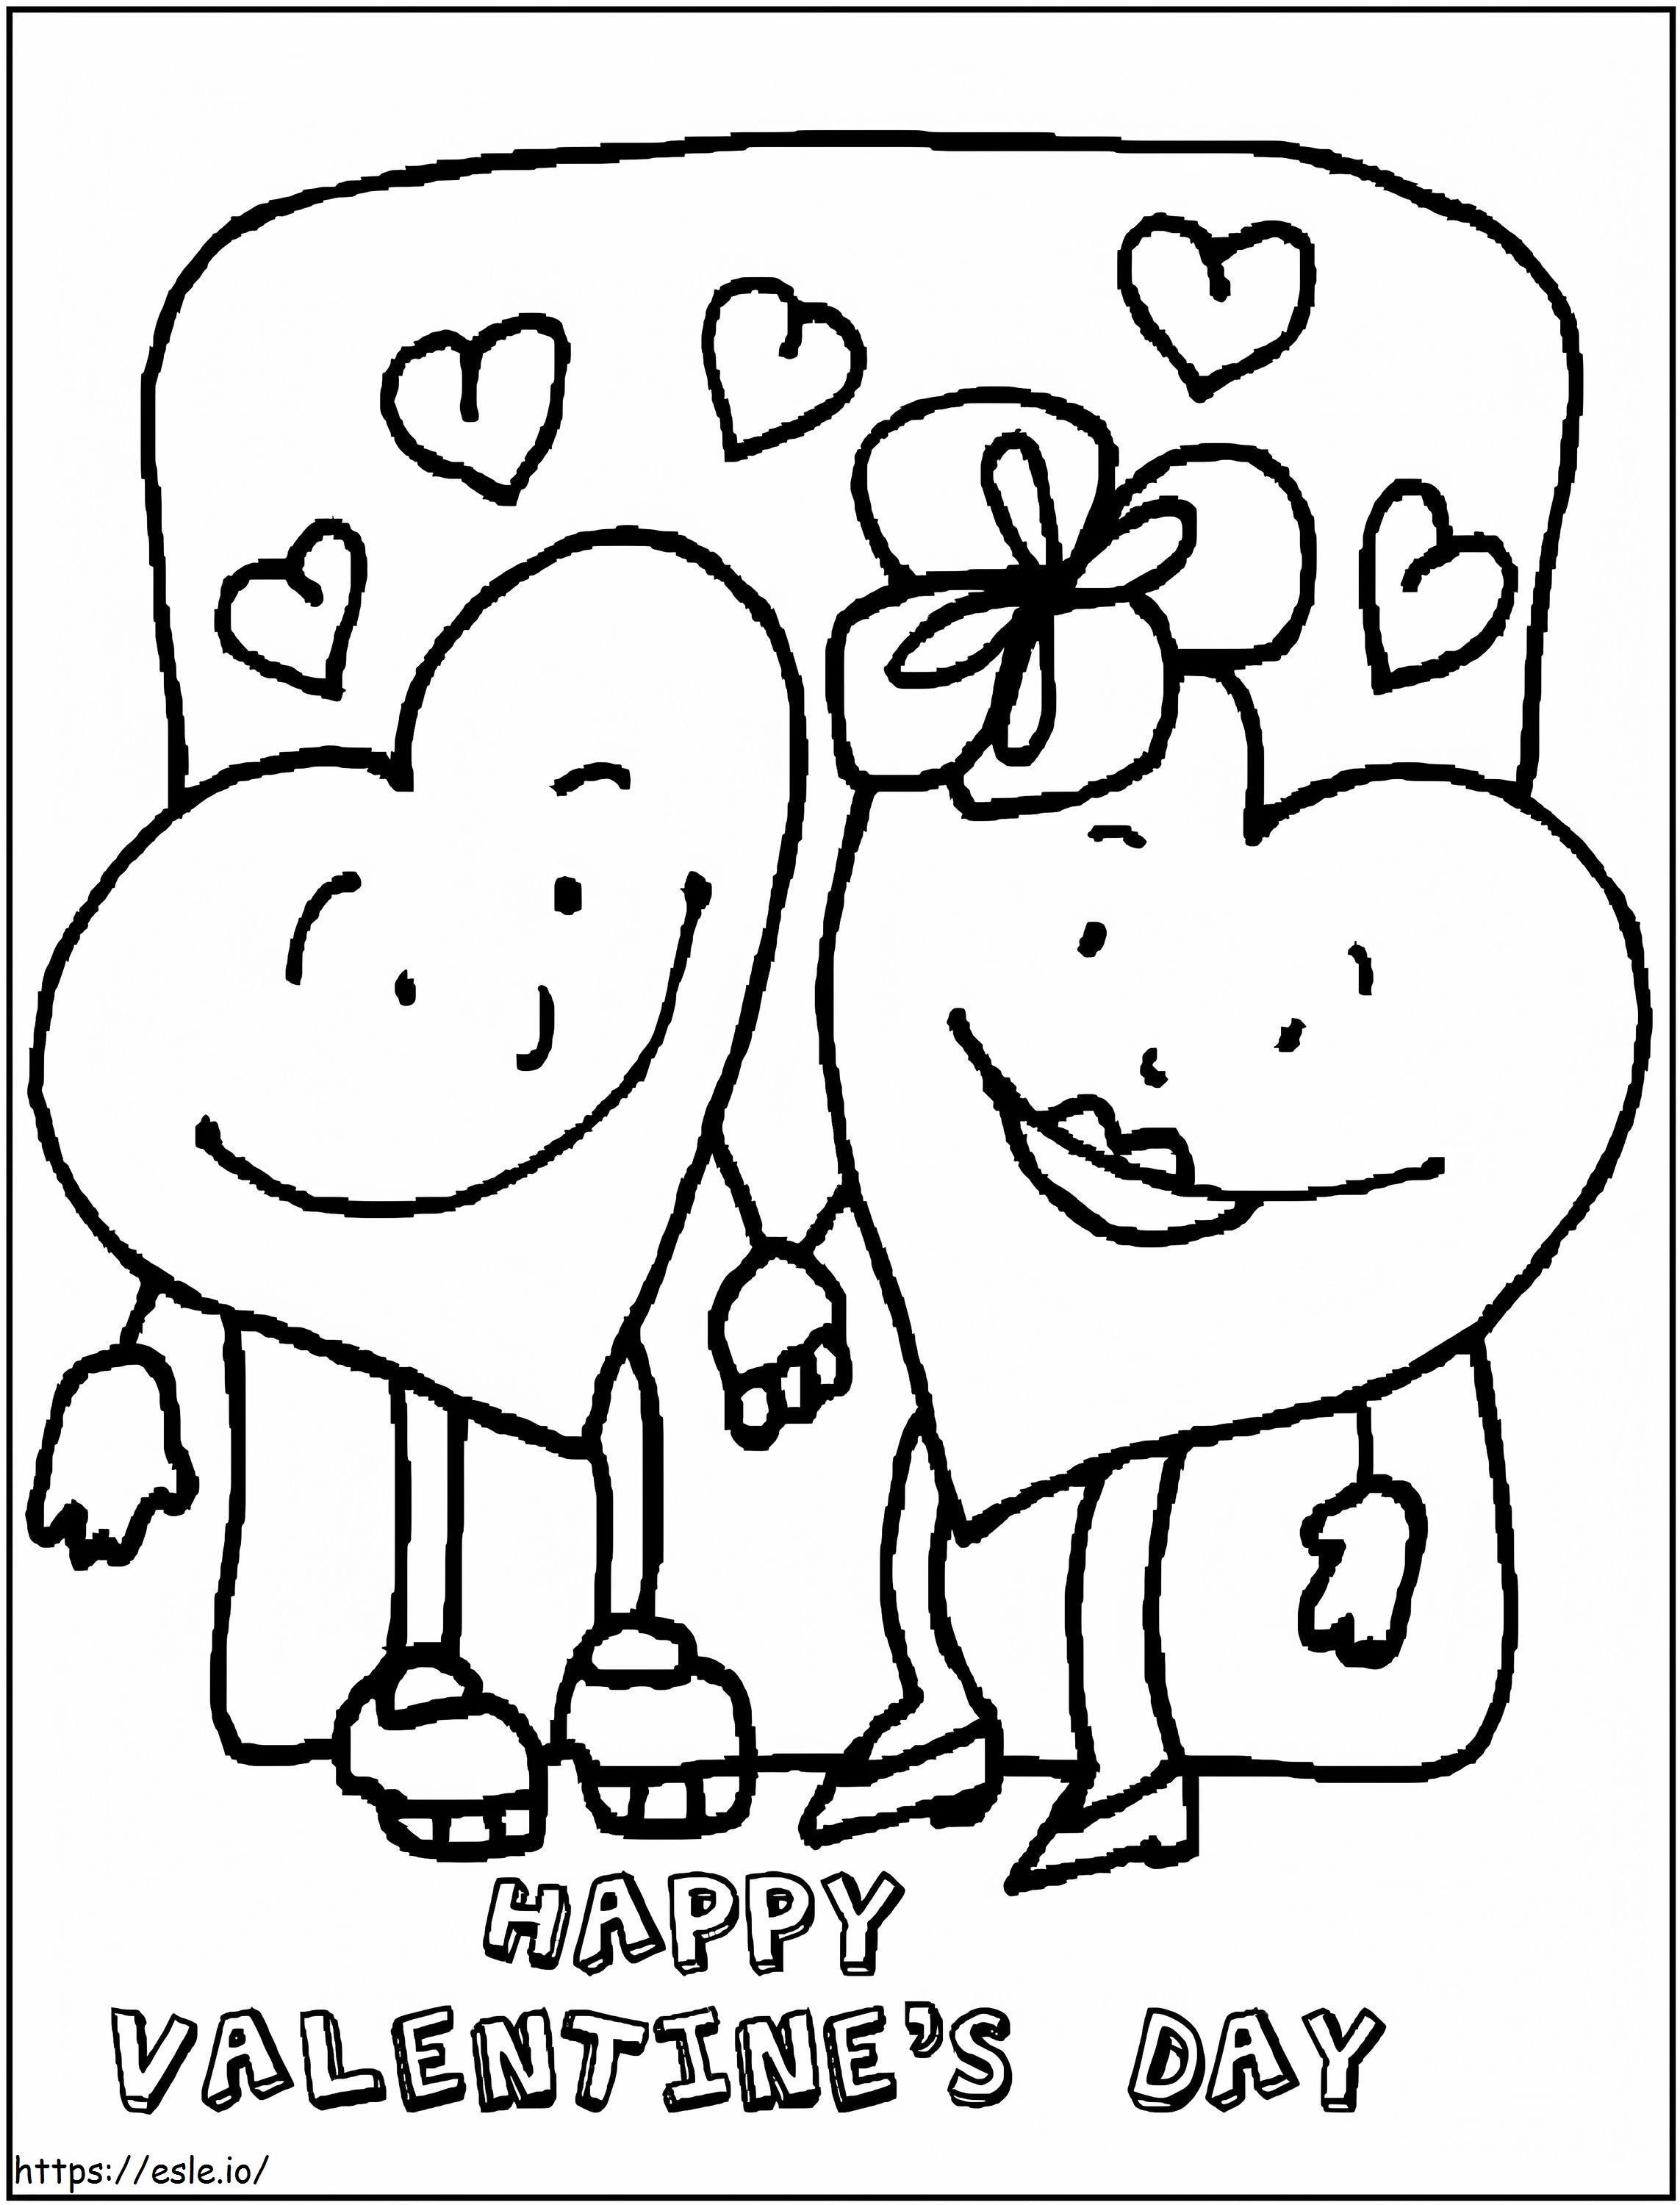 Couple Valentine Hearts coloring page